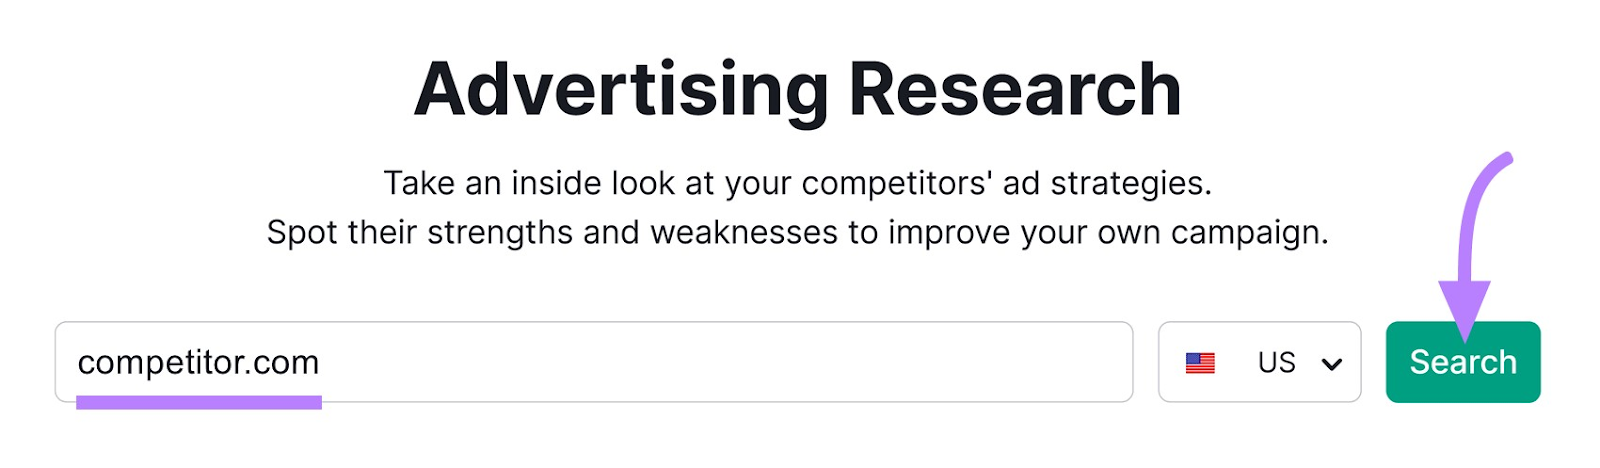 Advertising Research search bar